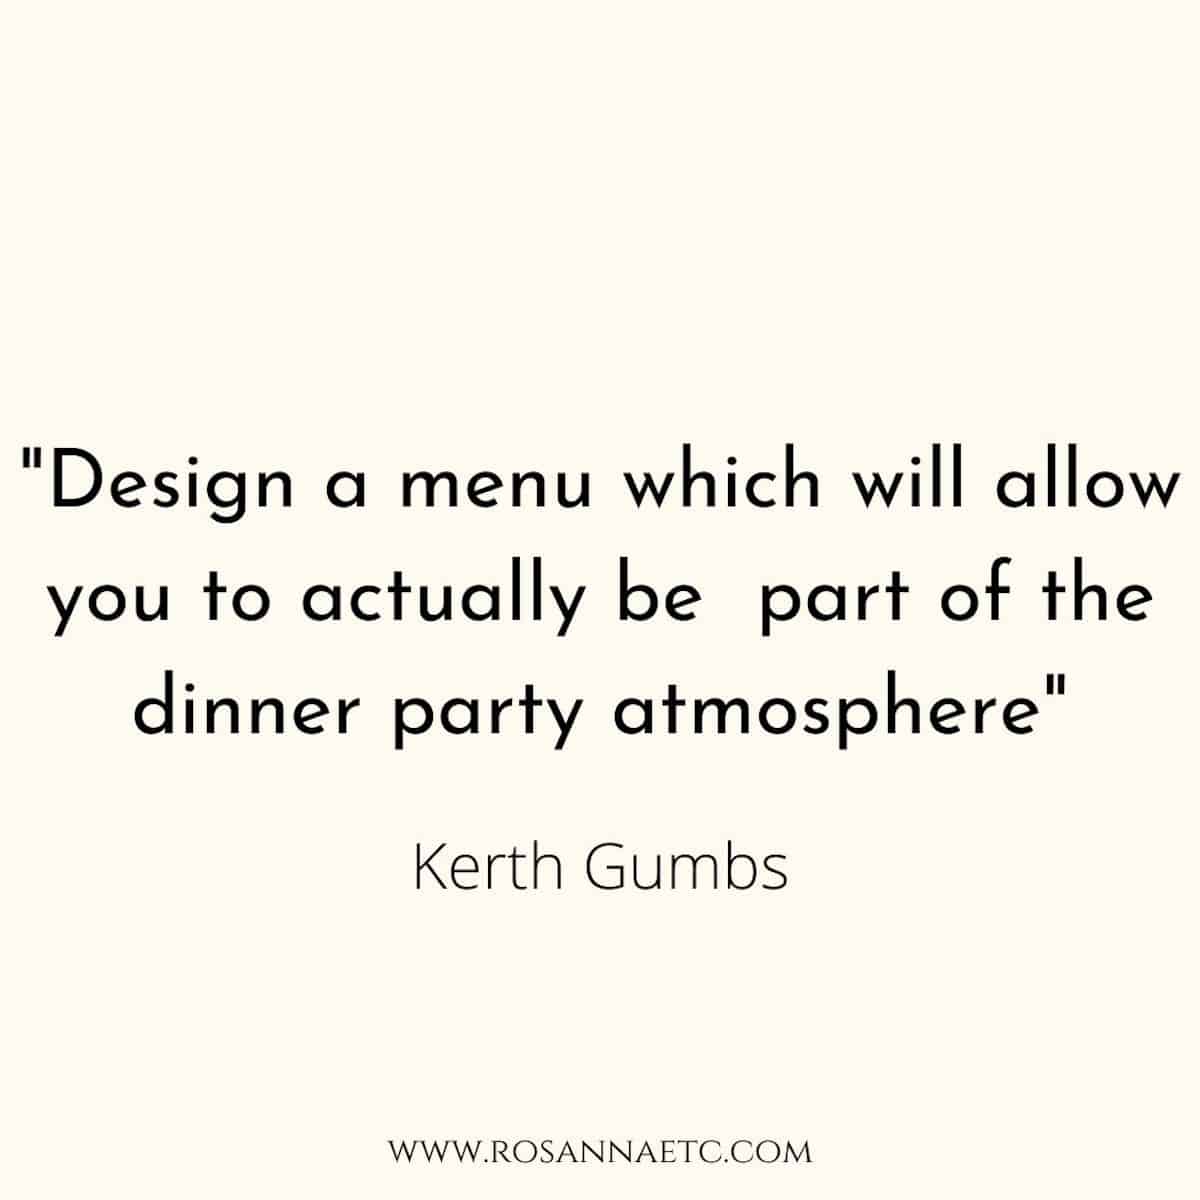 A quote from chef Kerth Gumbs that reads "Design a menu which will allow you to actually be part of the dinner party atmosphere".